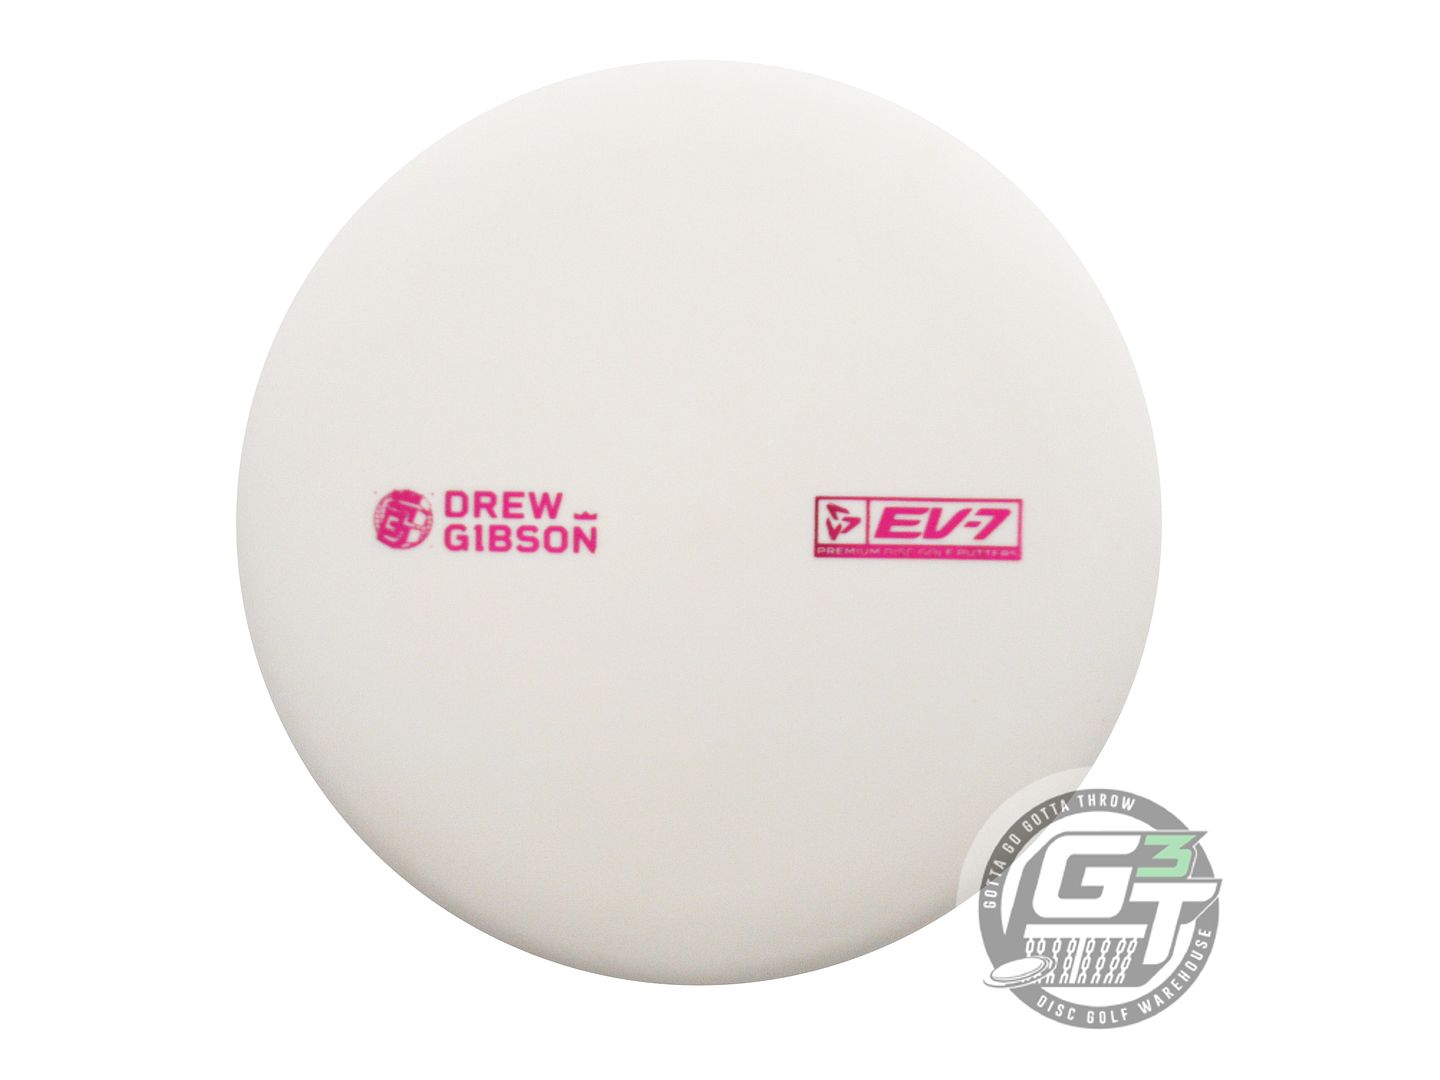 EV-7 Limited Edition 2021 Tour Series Drew Gibson OG Base Penrose Putter Golf Disc (Individually Listed)